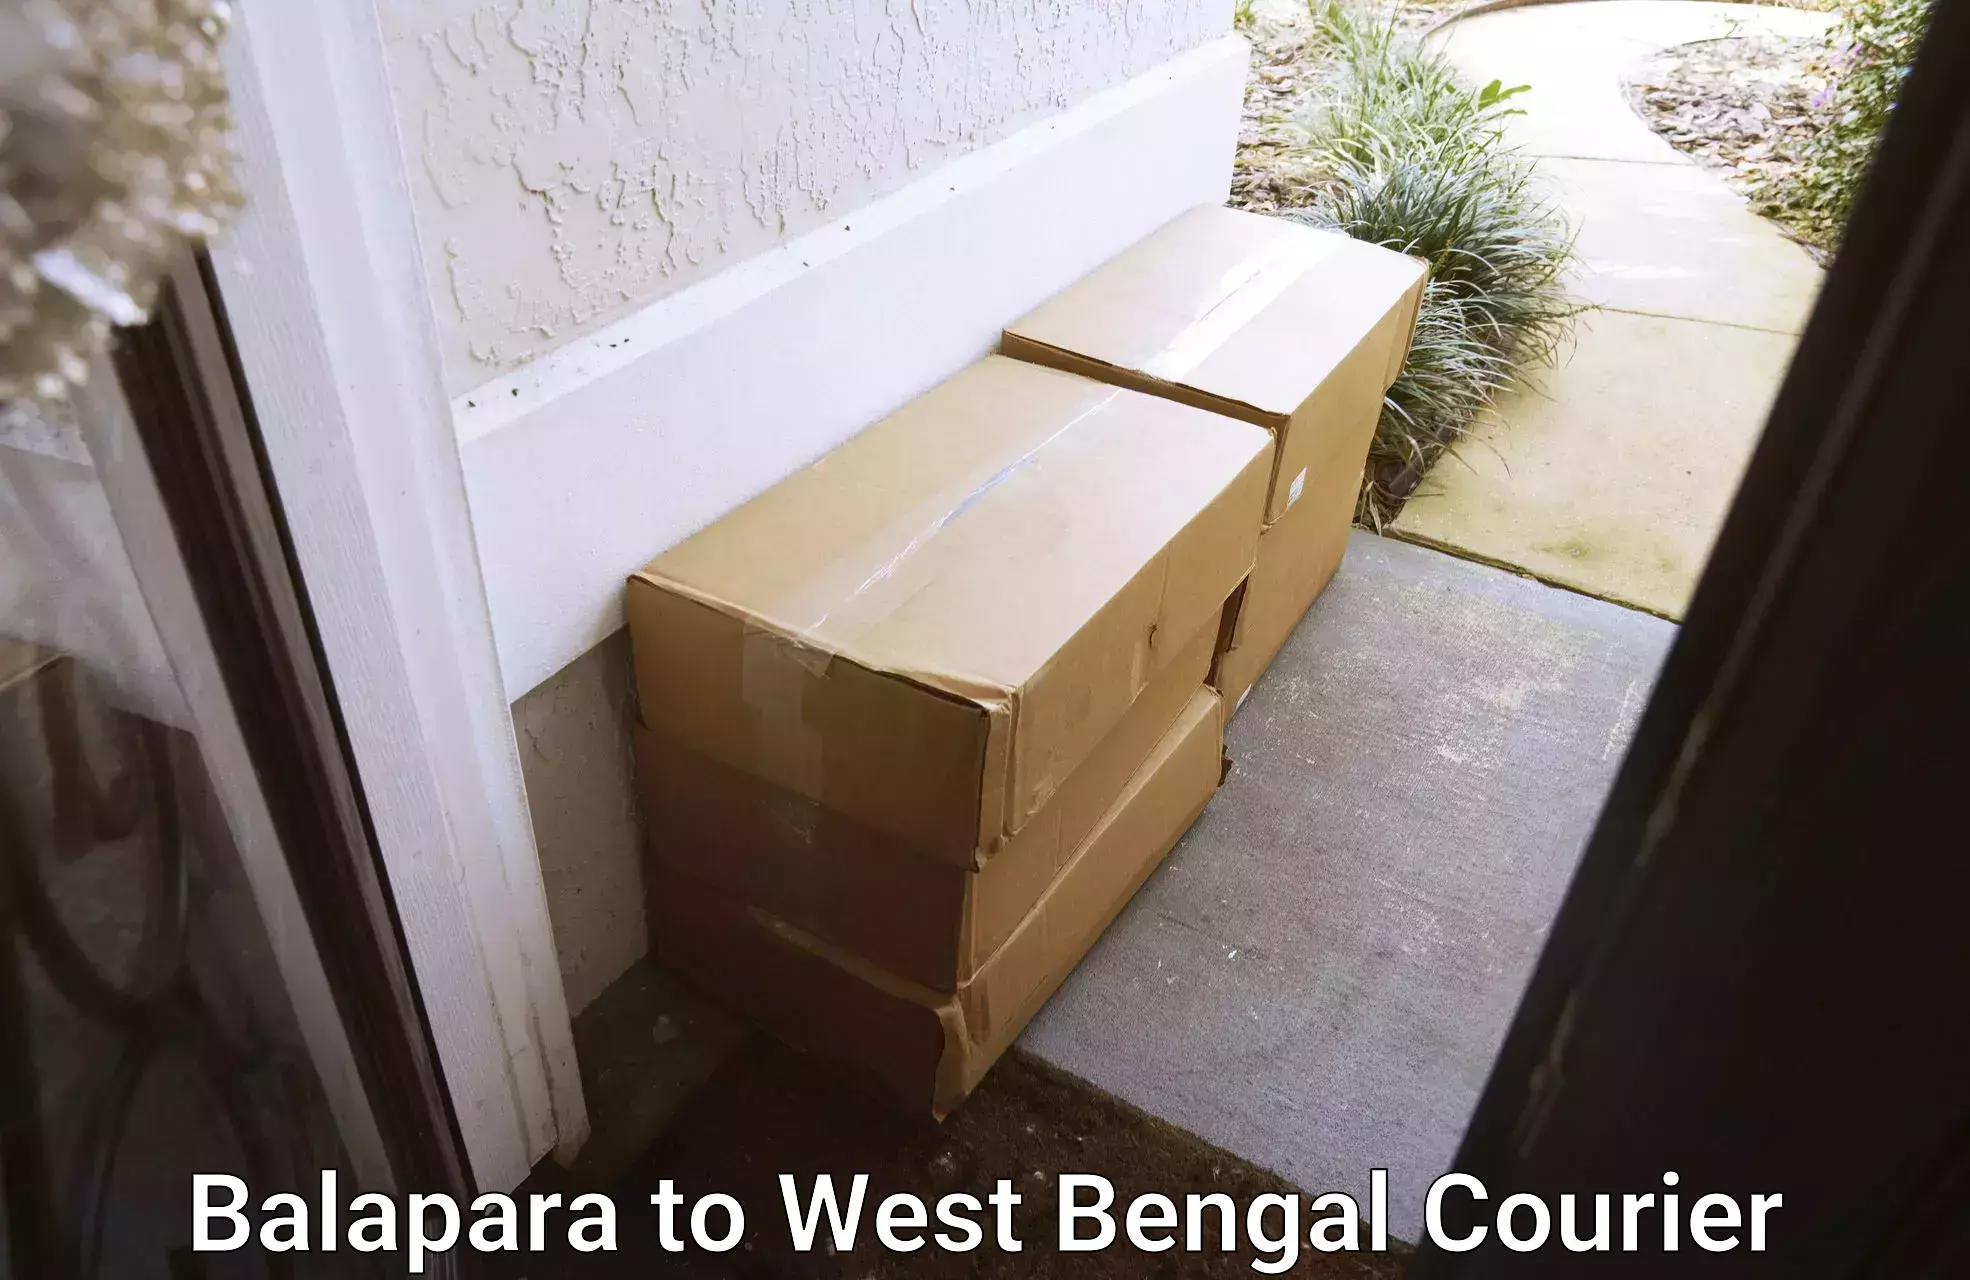 Full-service courier options in Balapara to West Bengal